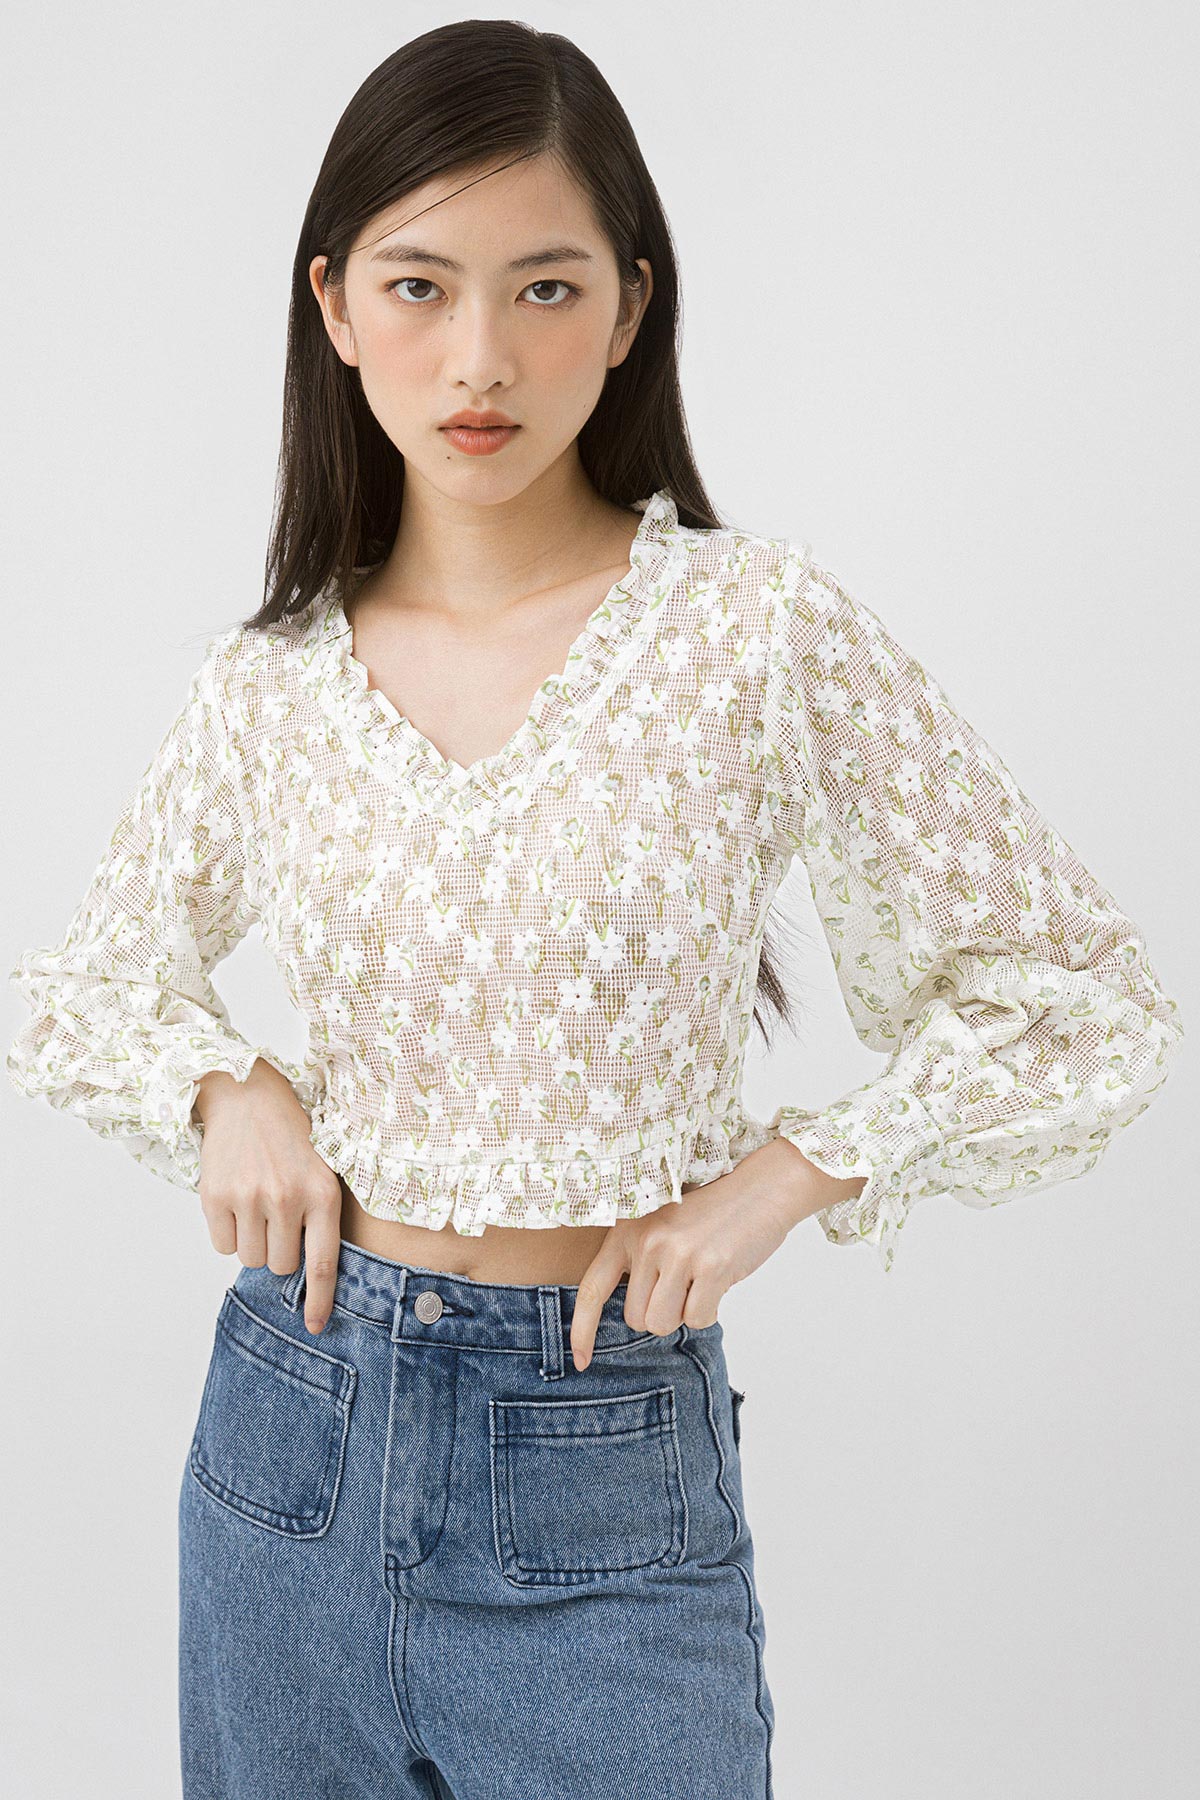 LAURETTE TOP - WILLOW SPRING [BY MODPARADE]